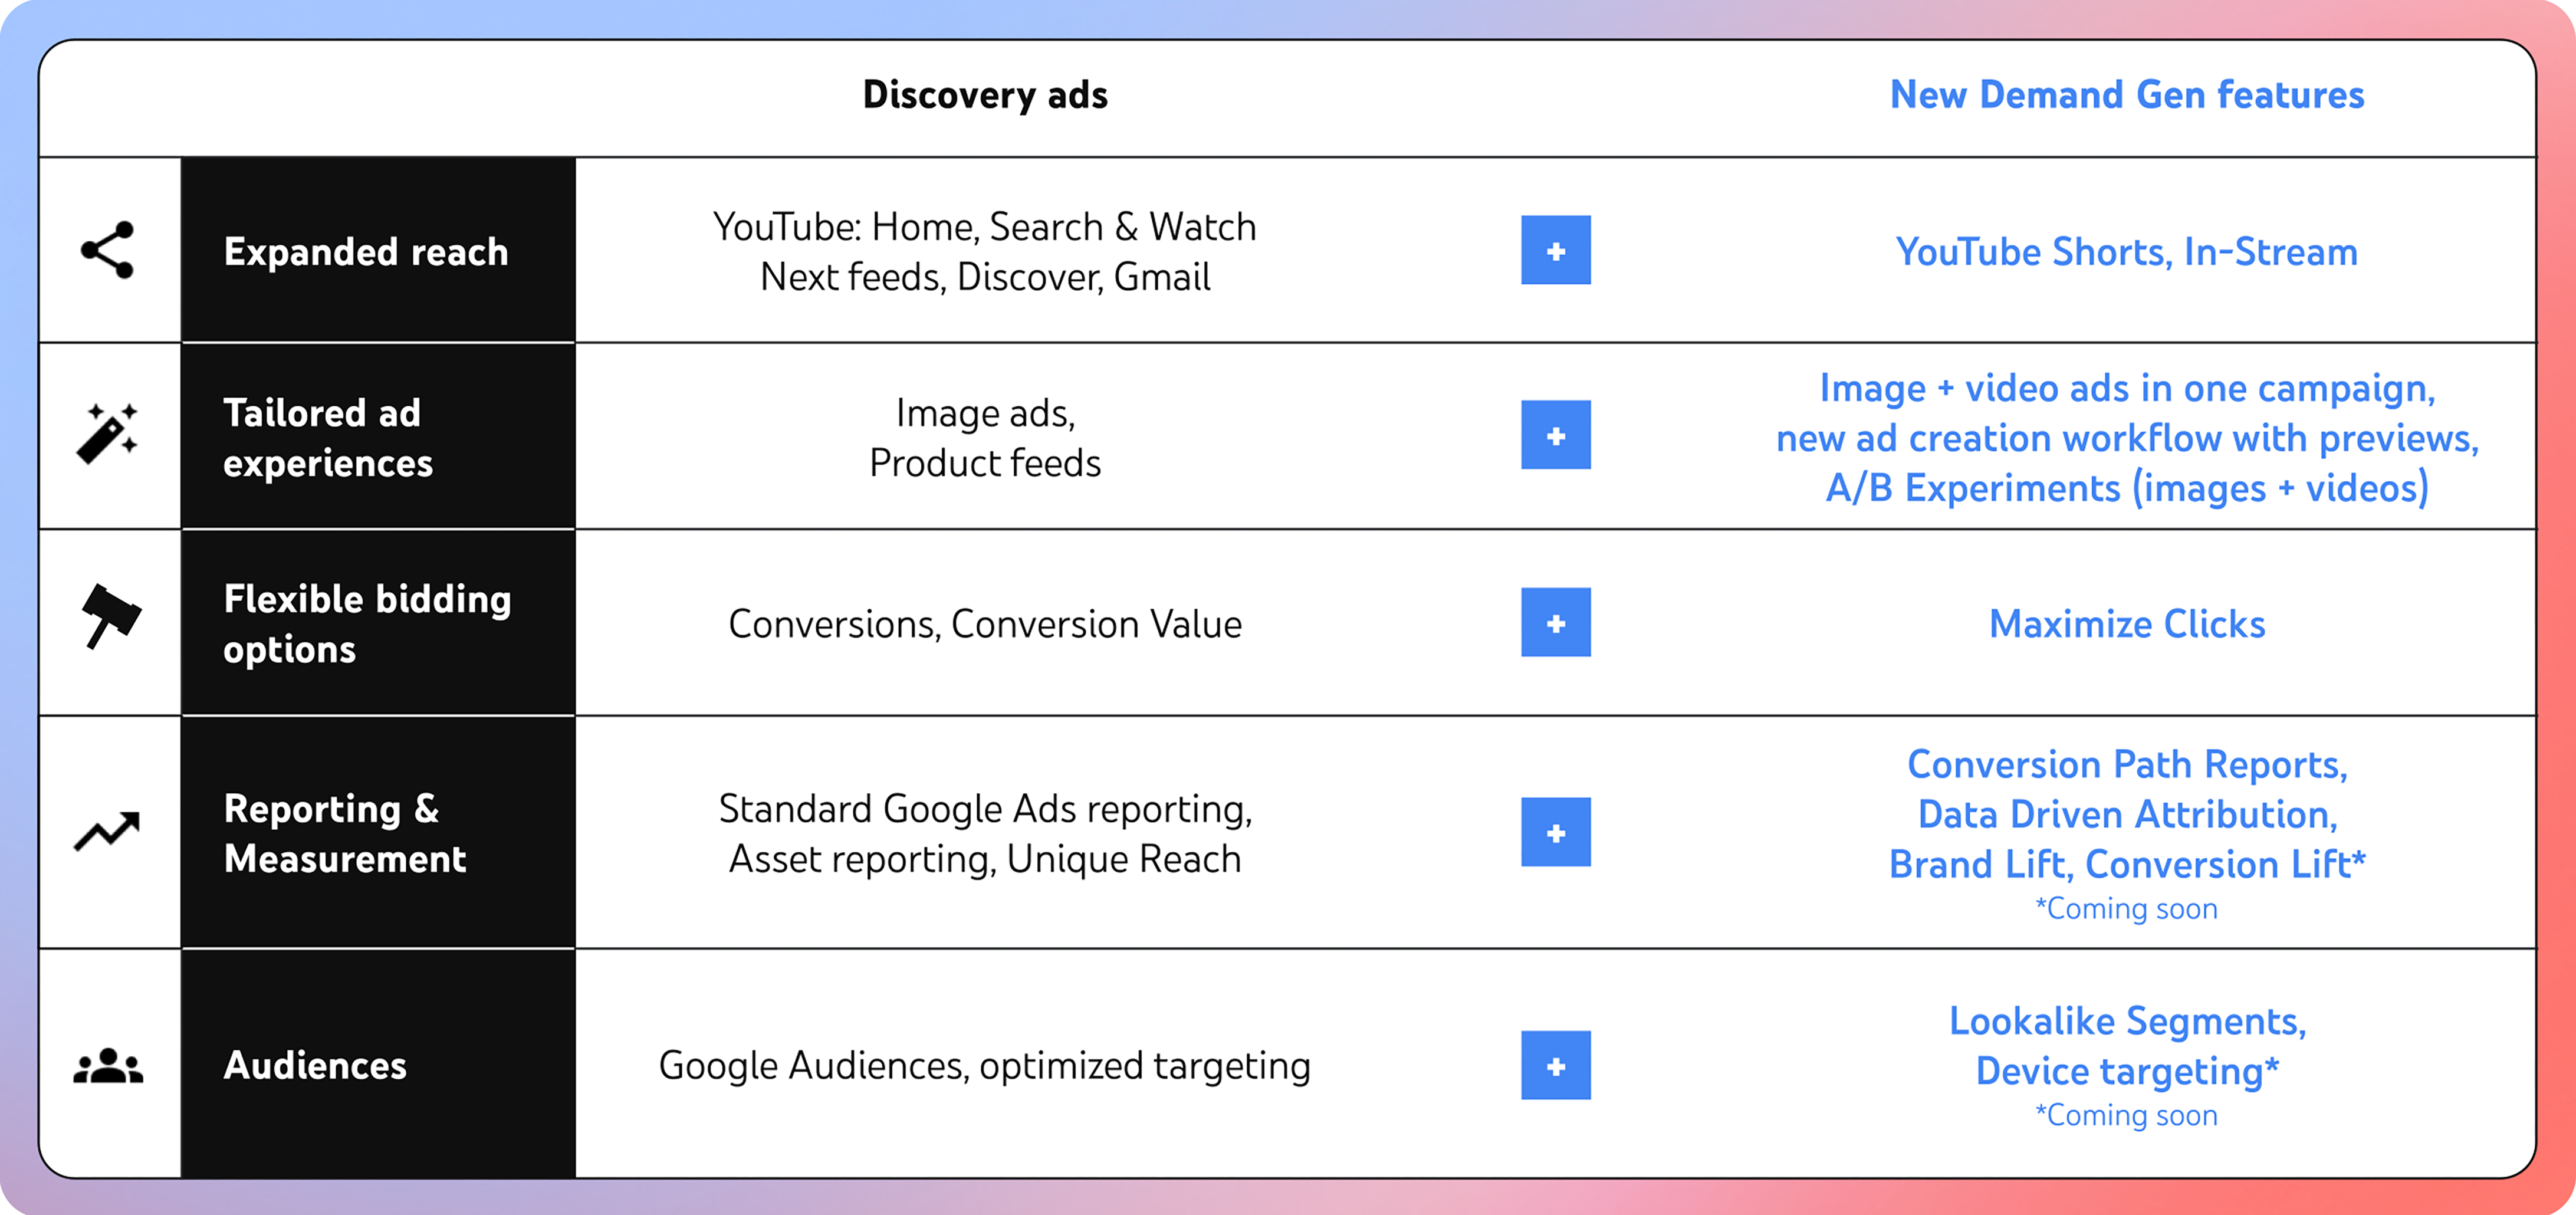 New Demand Gen Google Ads Campaign compared to the previous Discovery Ads